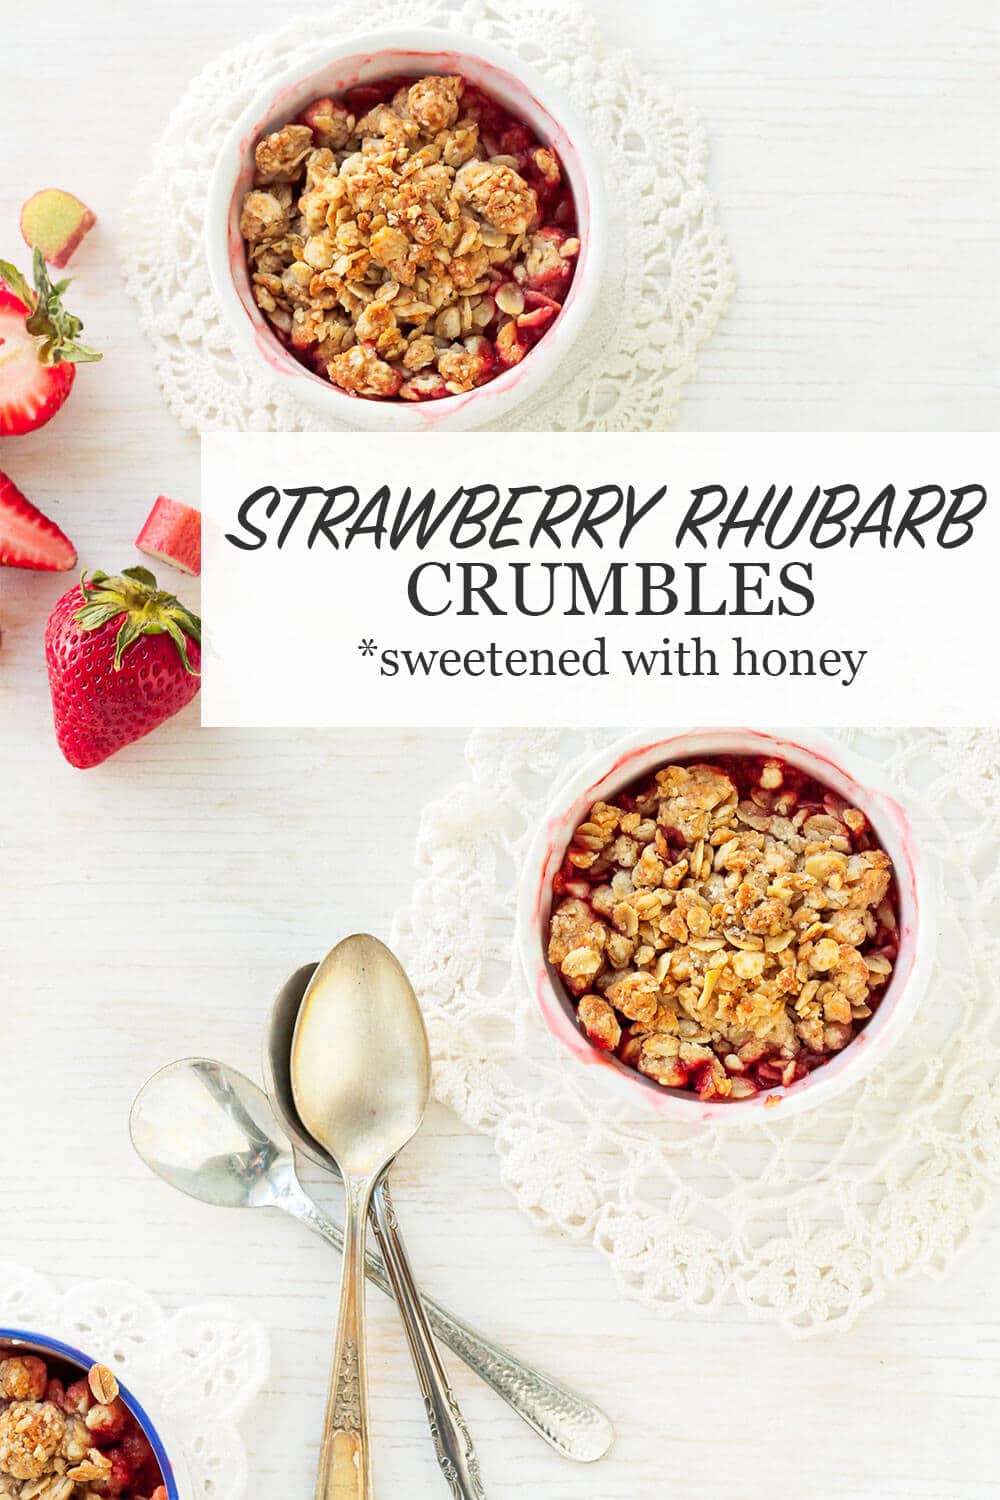 Strawberry rhubarb crumbles sweetened with honey and baked in ramekins